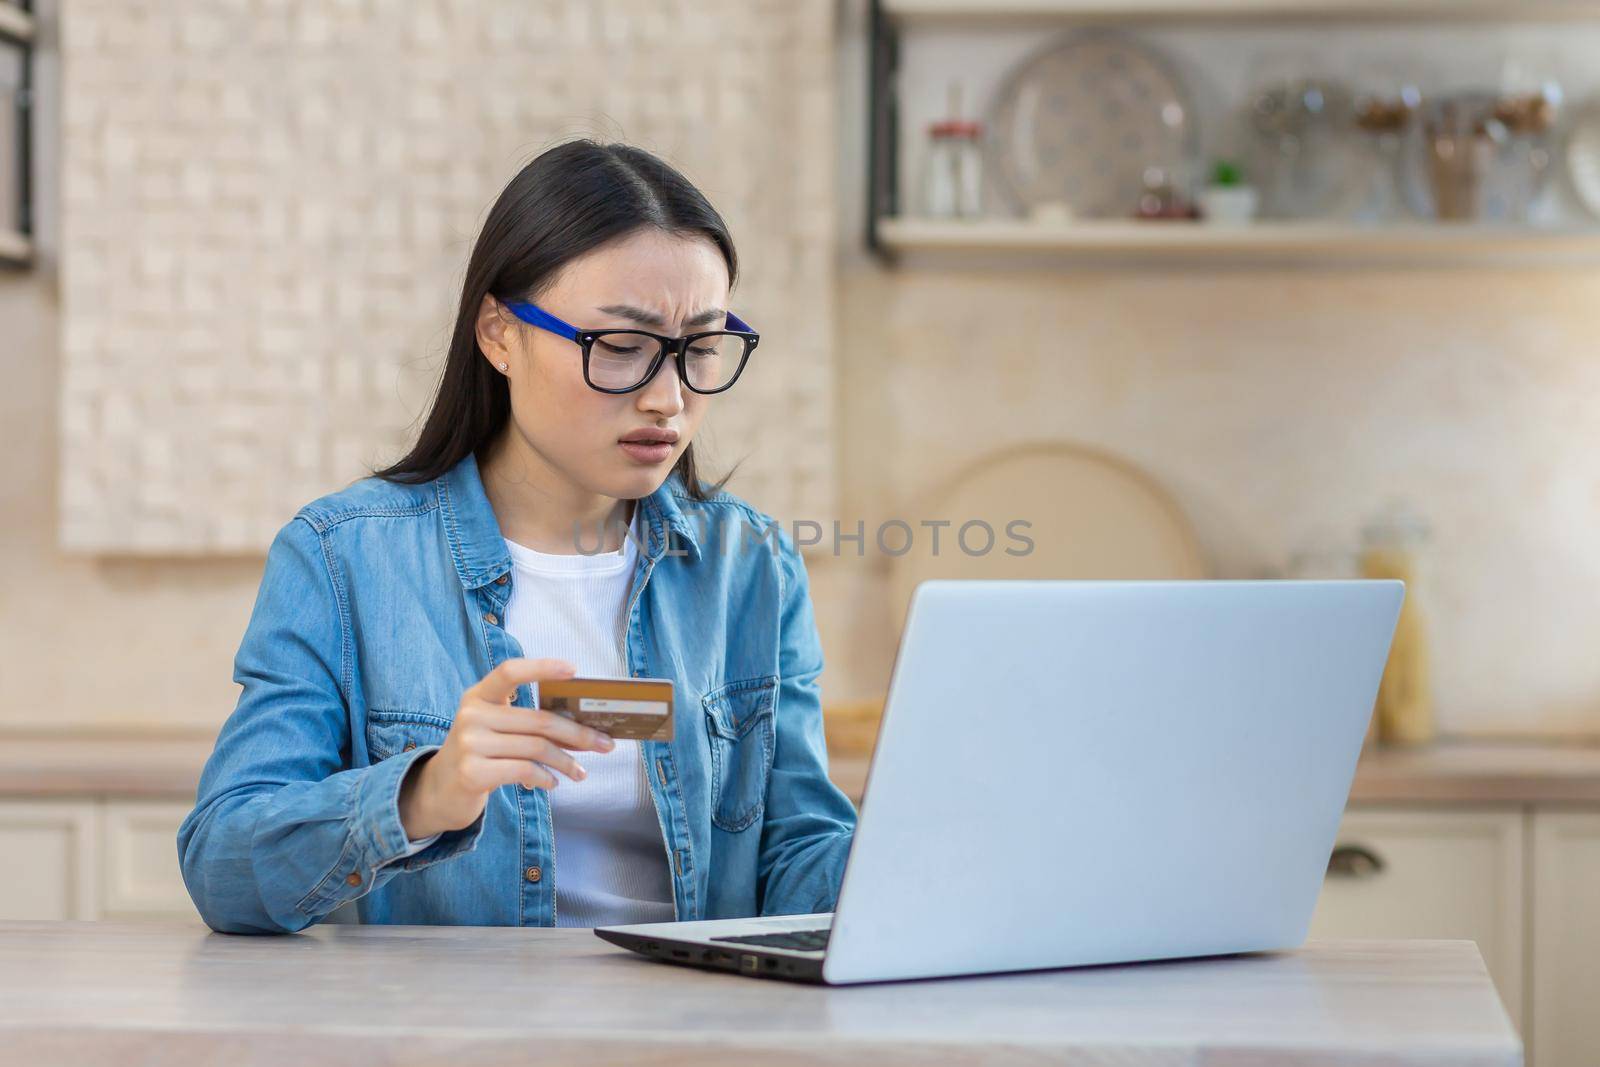 Upset and sad woman in depression trying to make online purchase in online store, Asian woman sitting at home in kitchen using laptop and bank credit card, unable to make payment online by voronaman